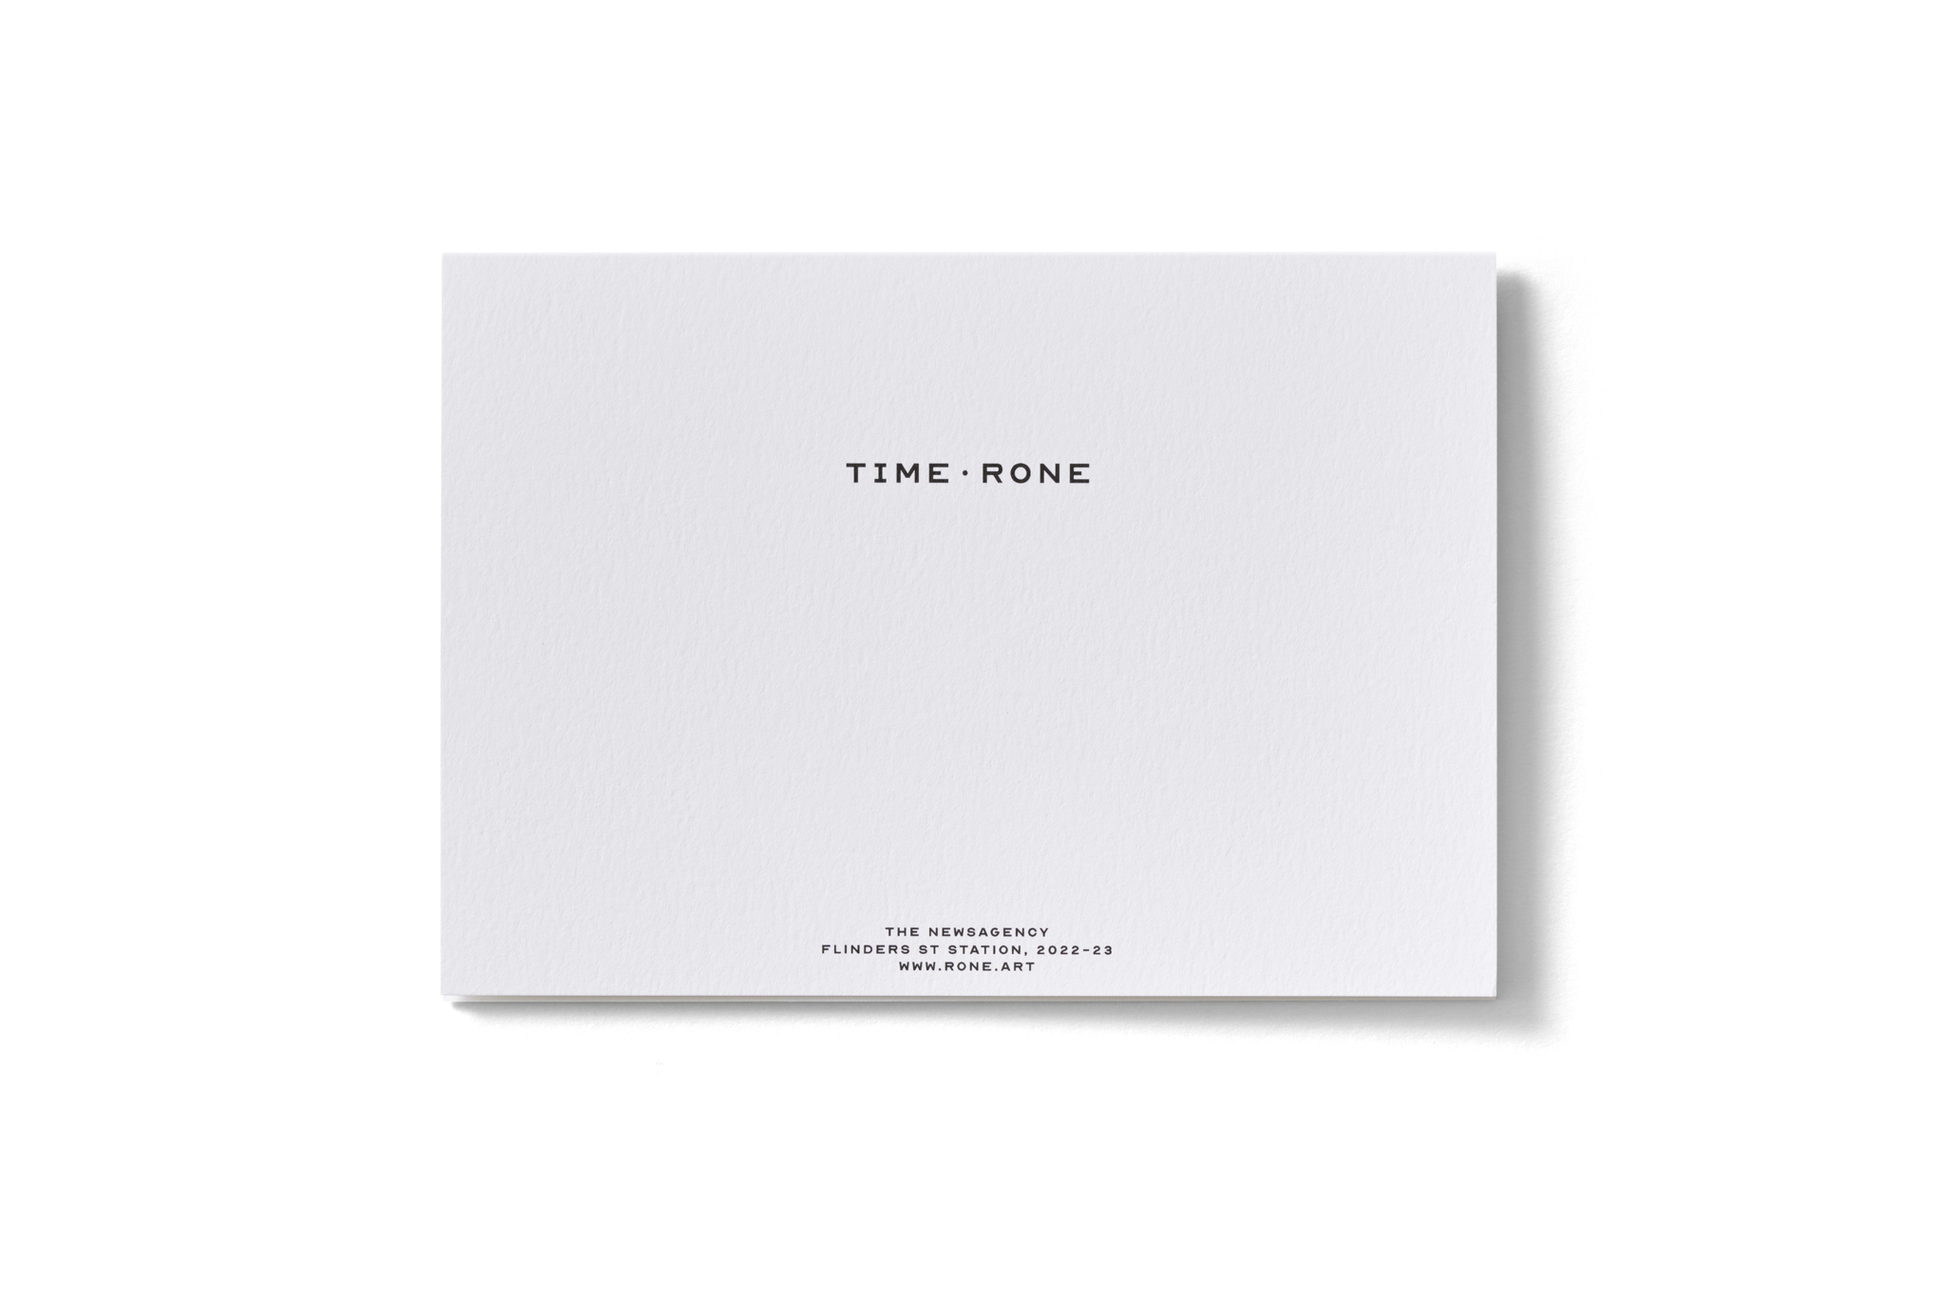 Rone Time Exhibition Greeting Card